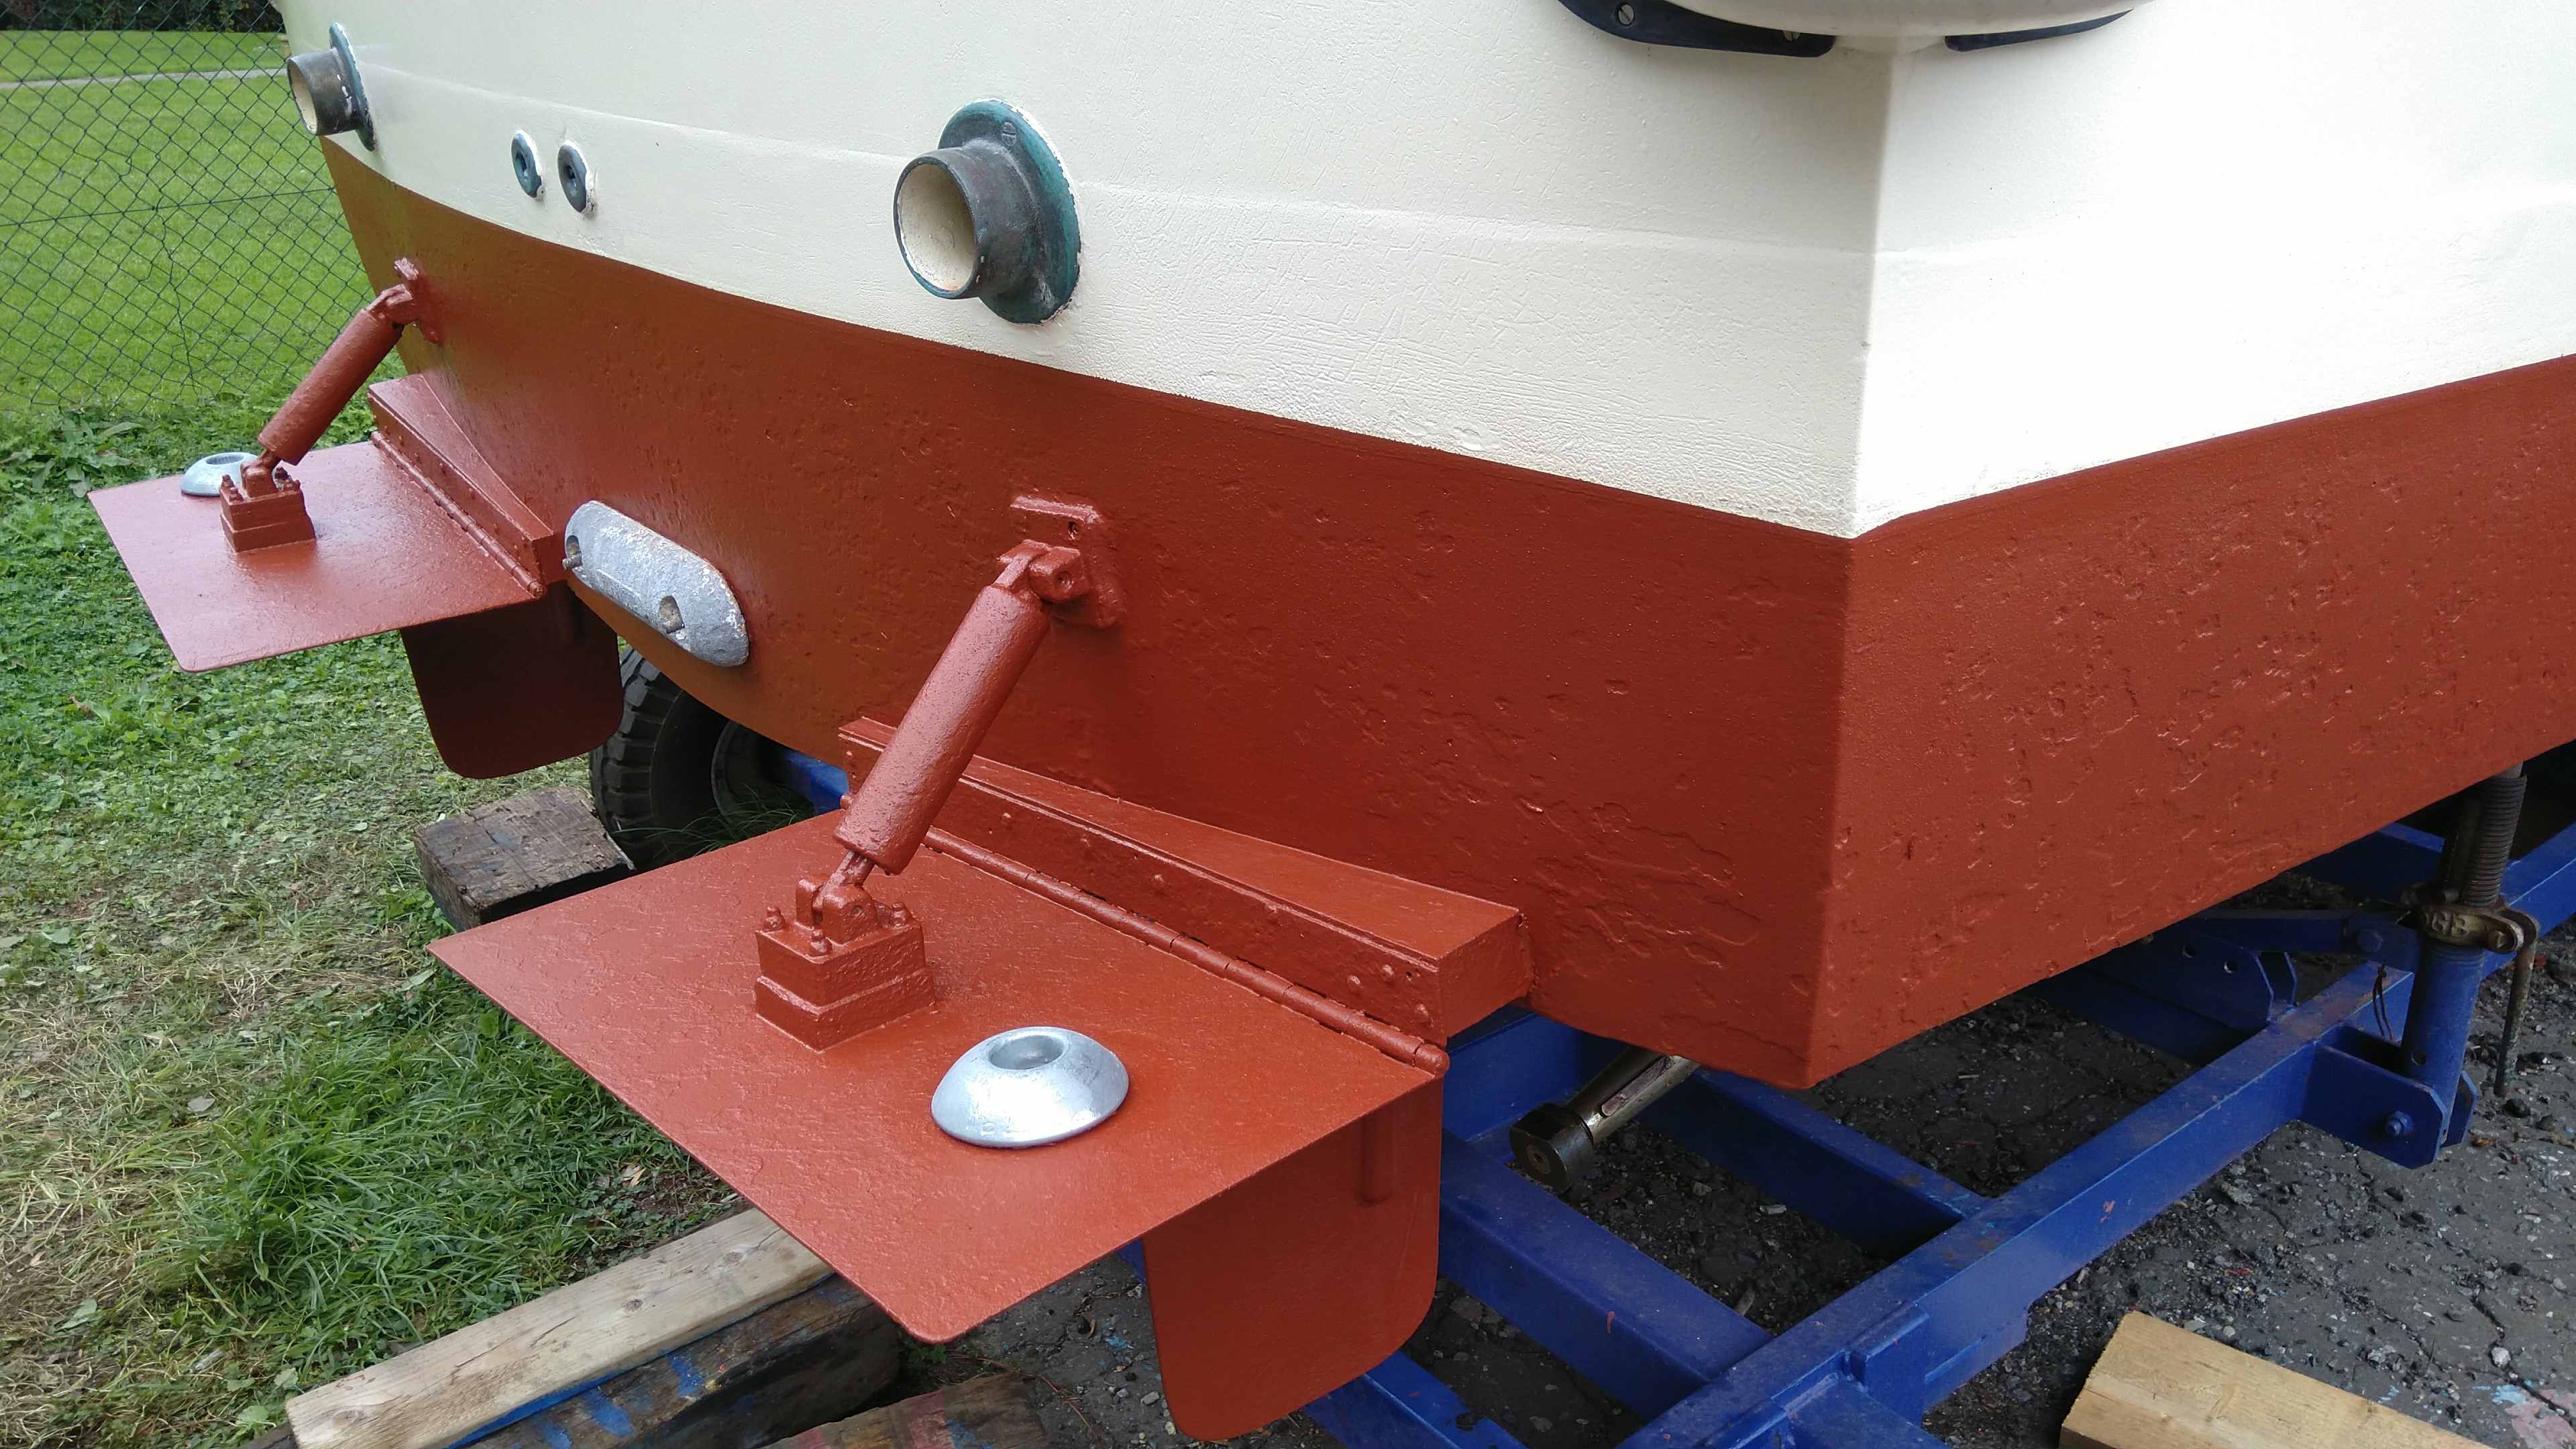 Trim tabs and anodes